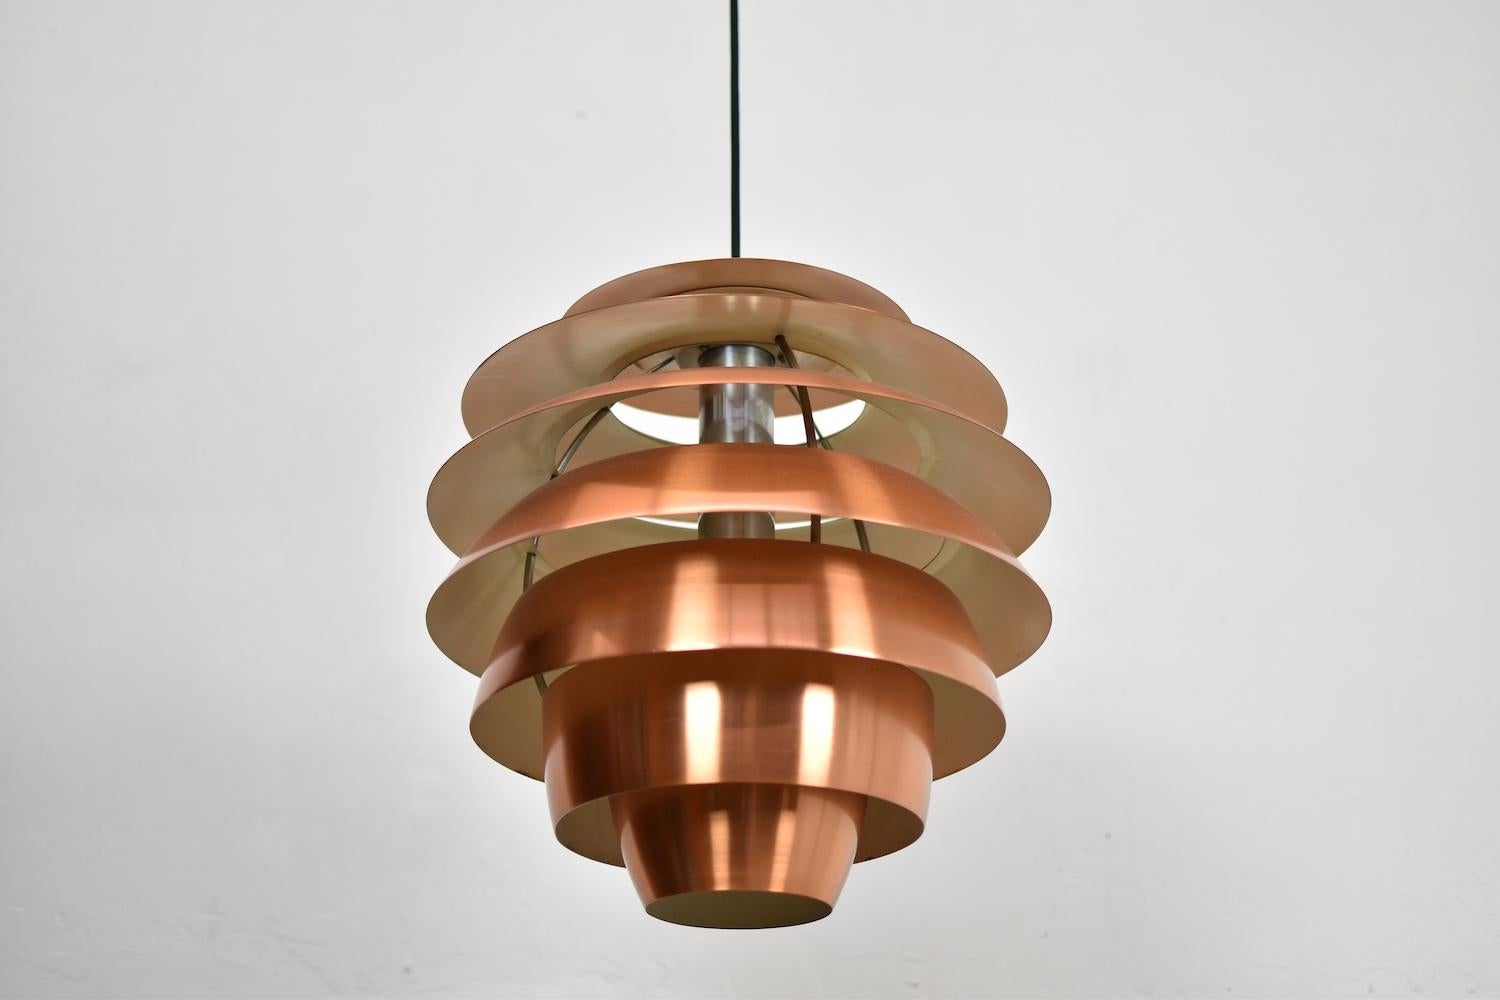 Probably one of the rarest pendants available on the international market. Proud to present you this early model ‘1231’ pendant by Stilnovo, Italy, 1960s. This hanging lamp features nickel-plated brass and brushed copper. Extremely good original